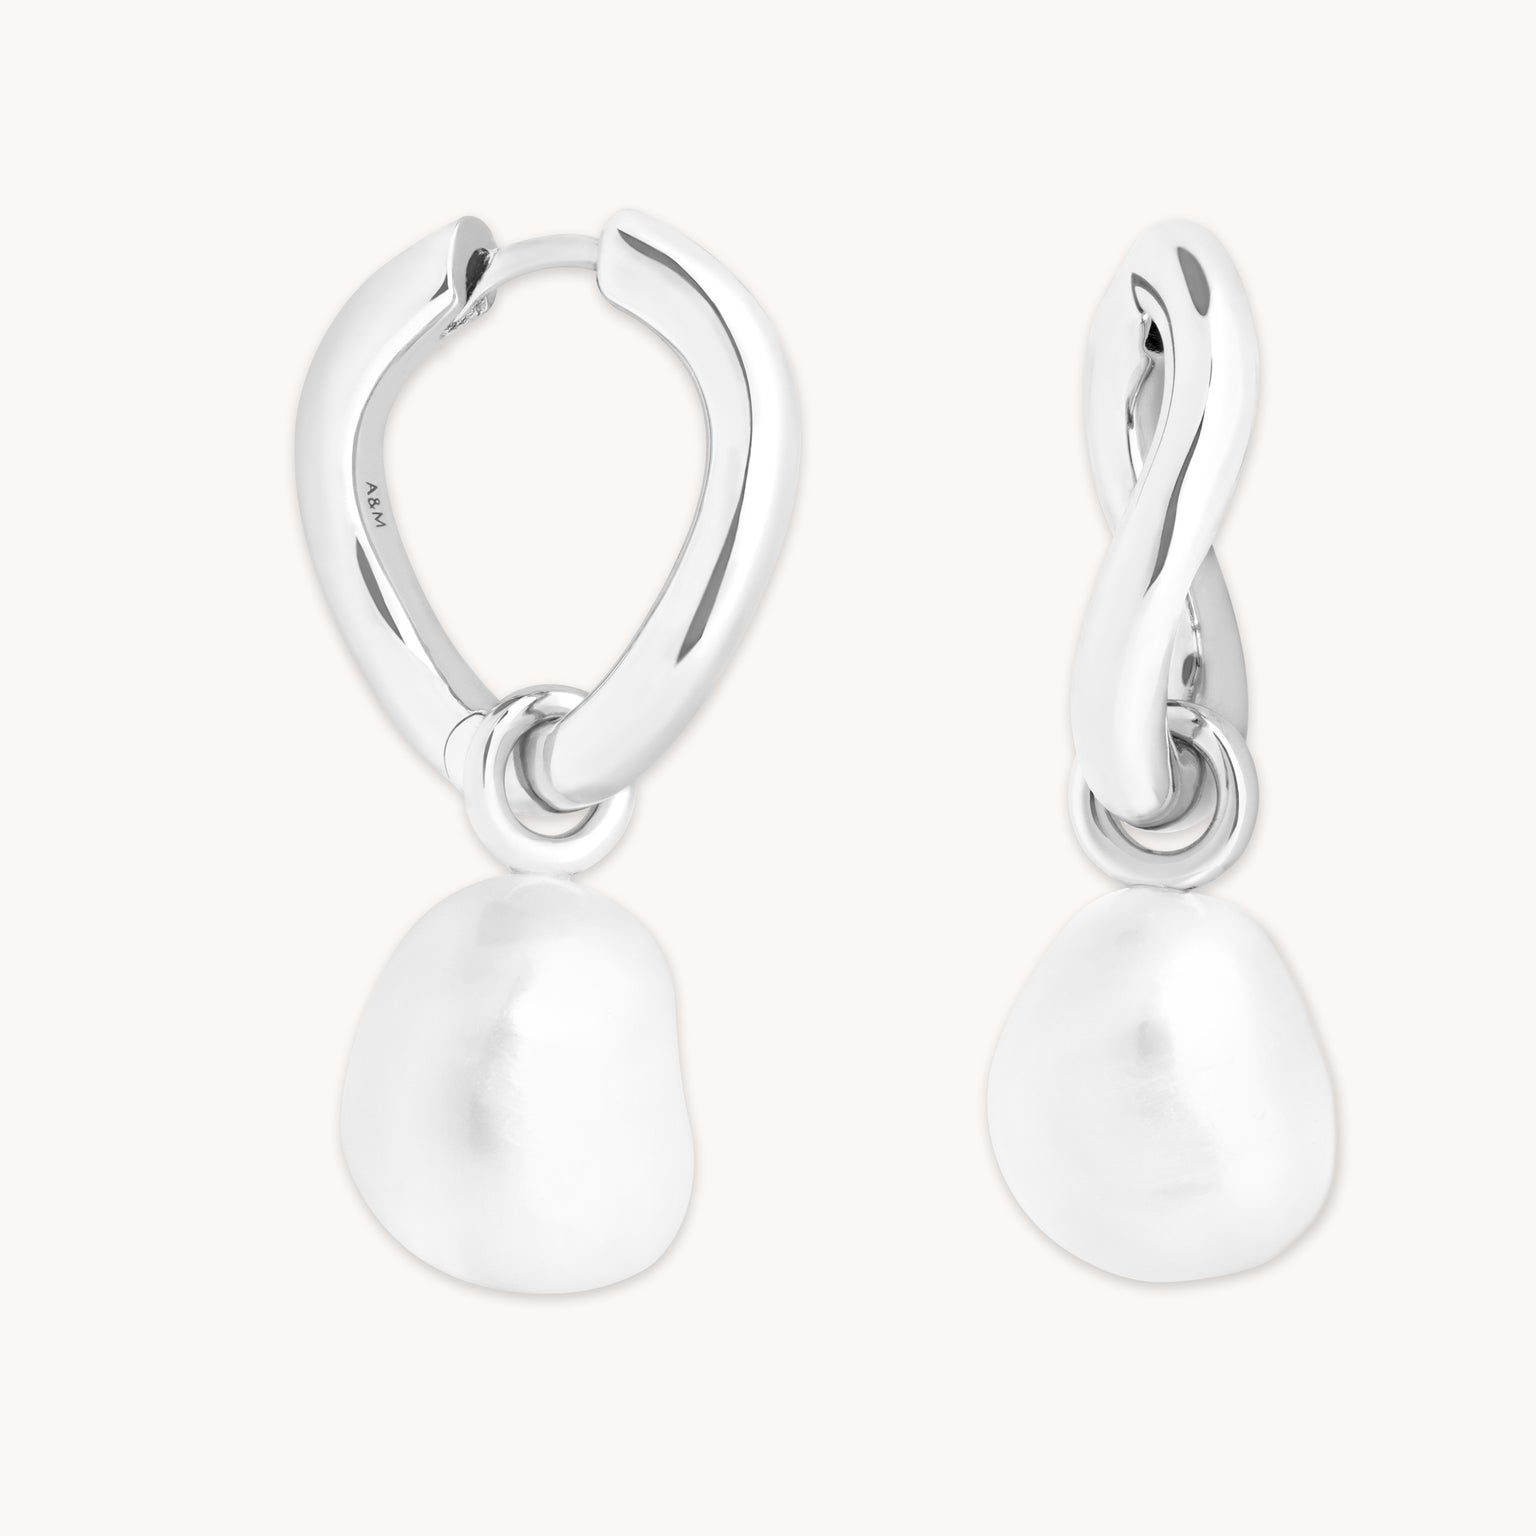 Serenity Pearl Charm Hoops in Silver